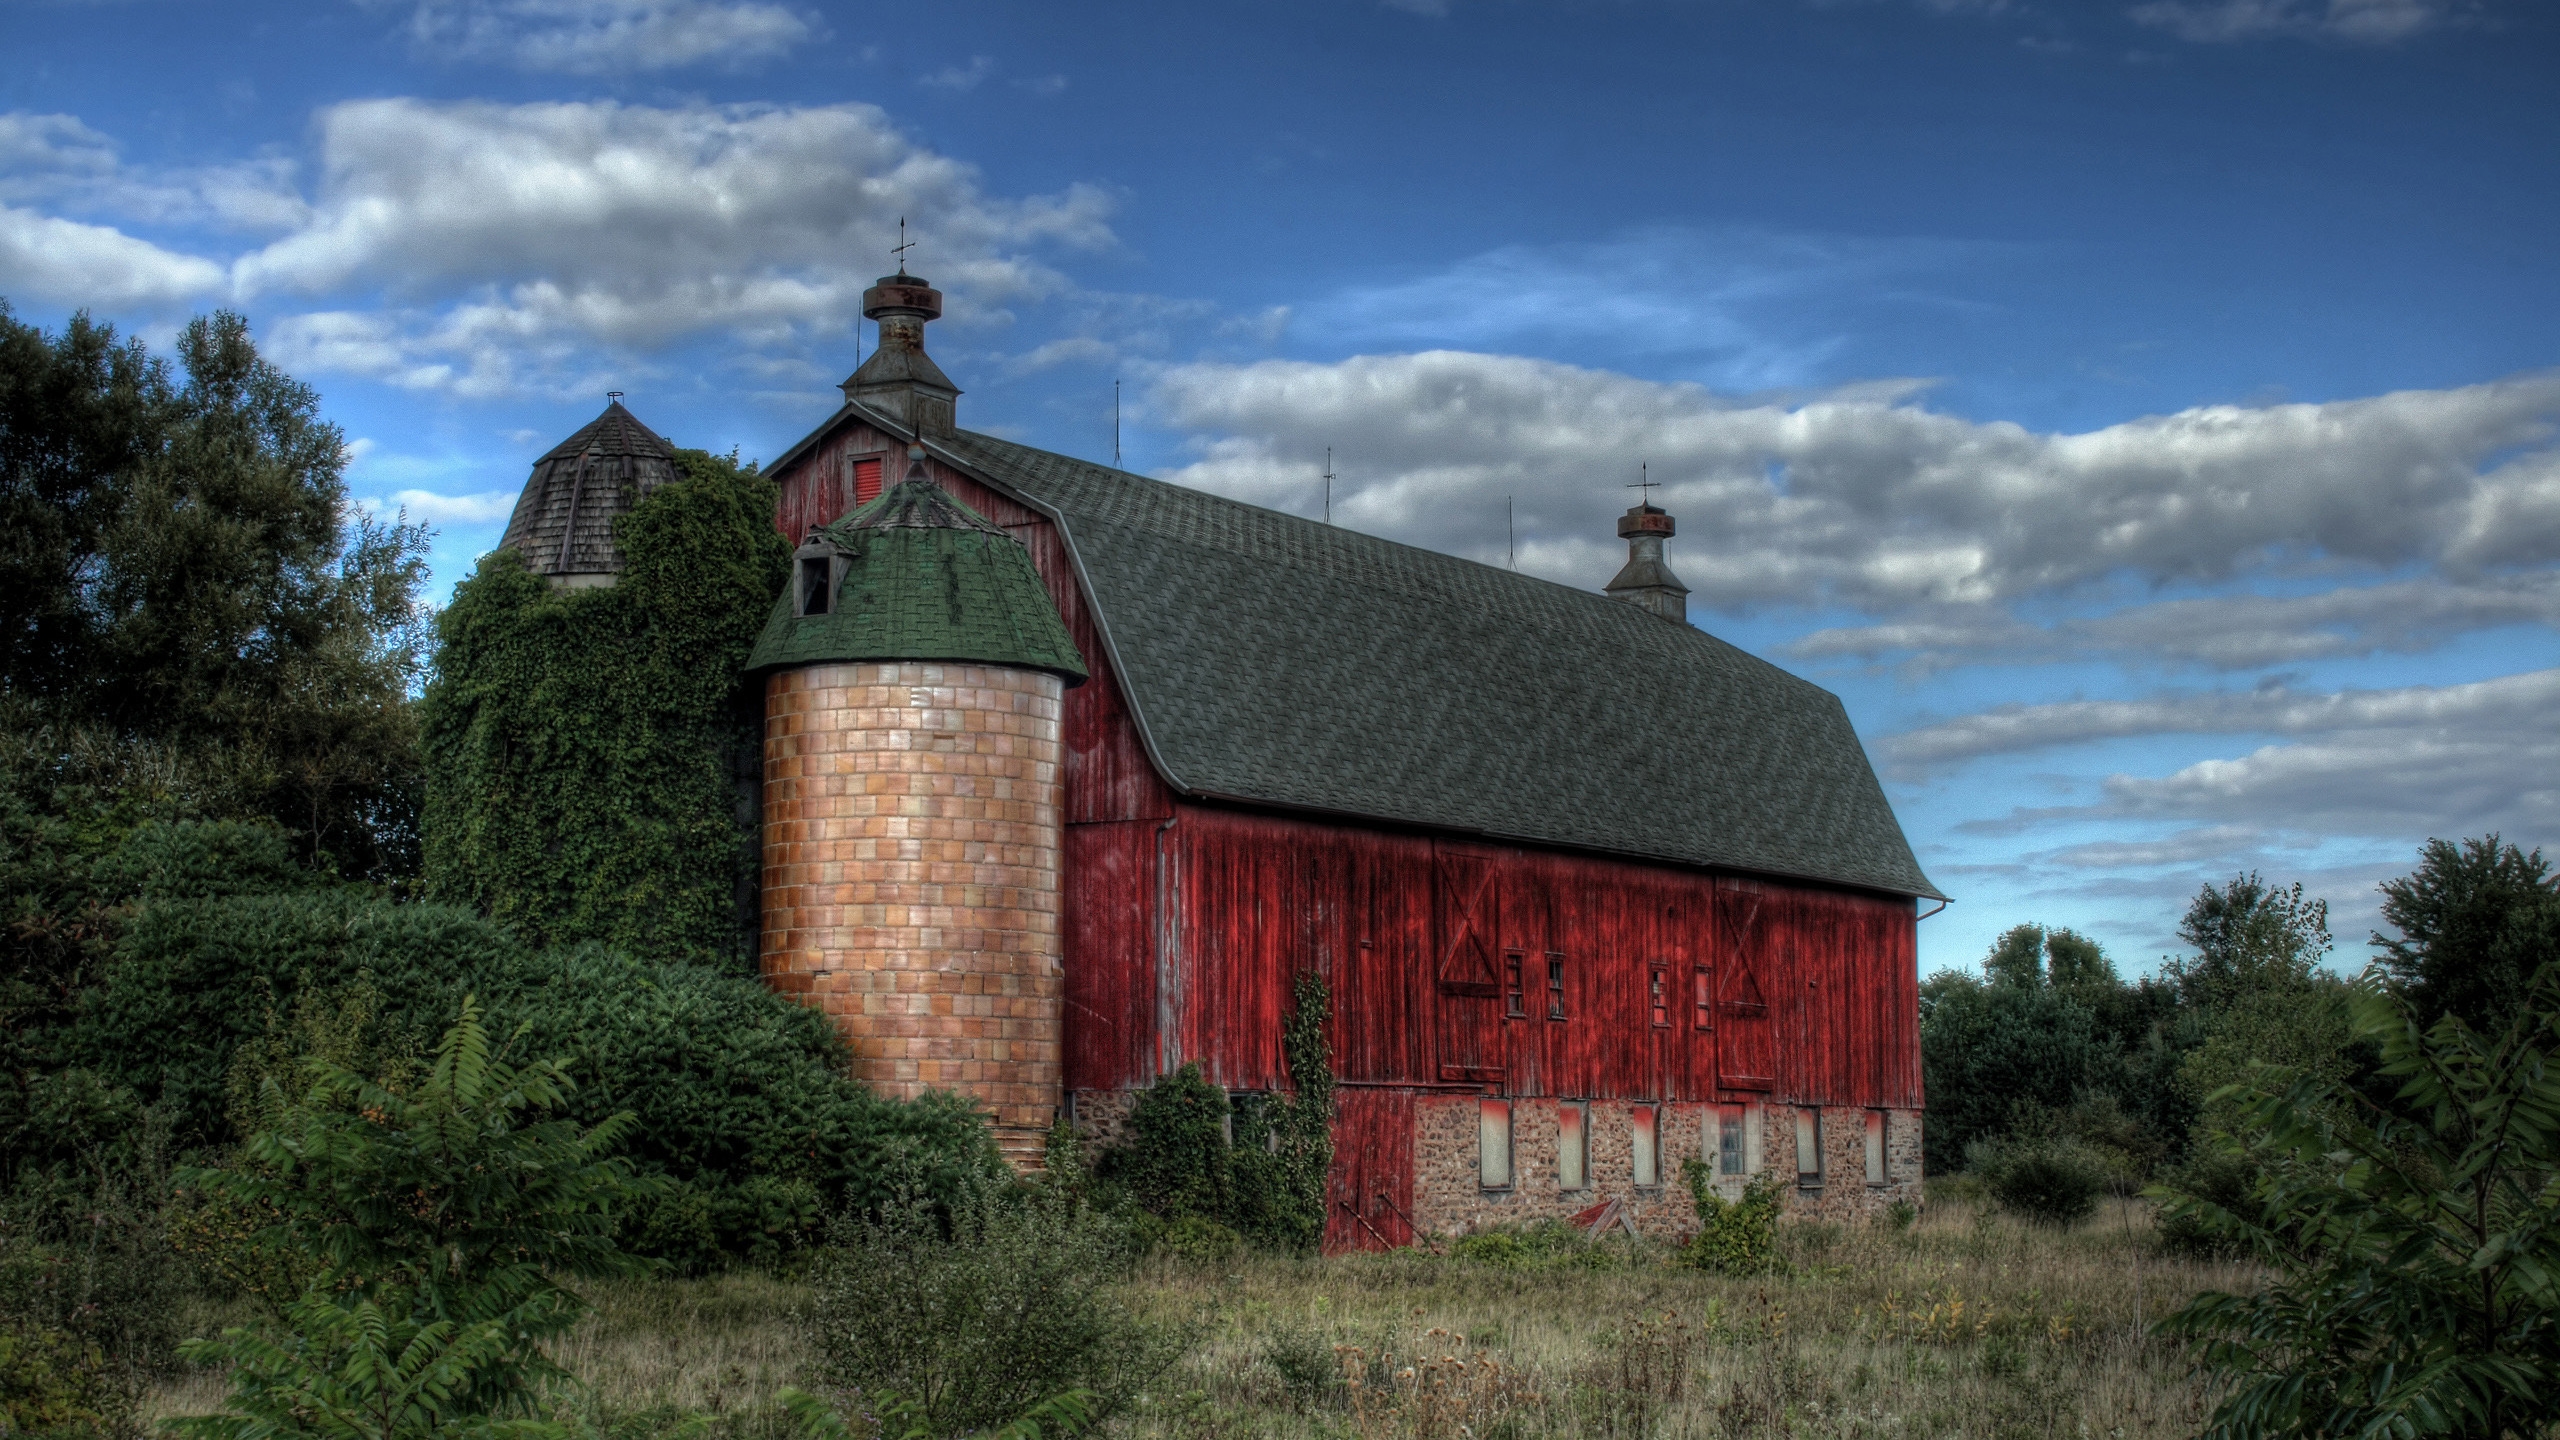 Old Red Barn for 2560x1440 HDTV resolution